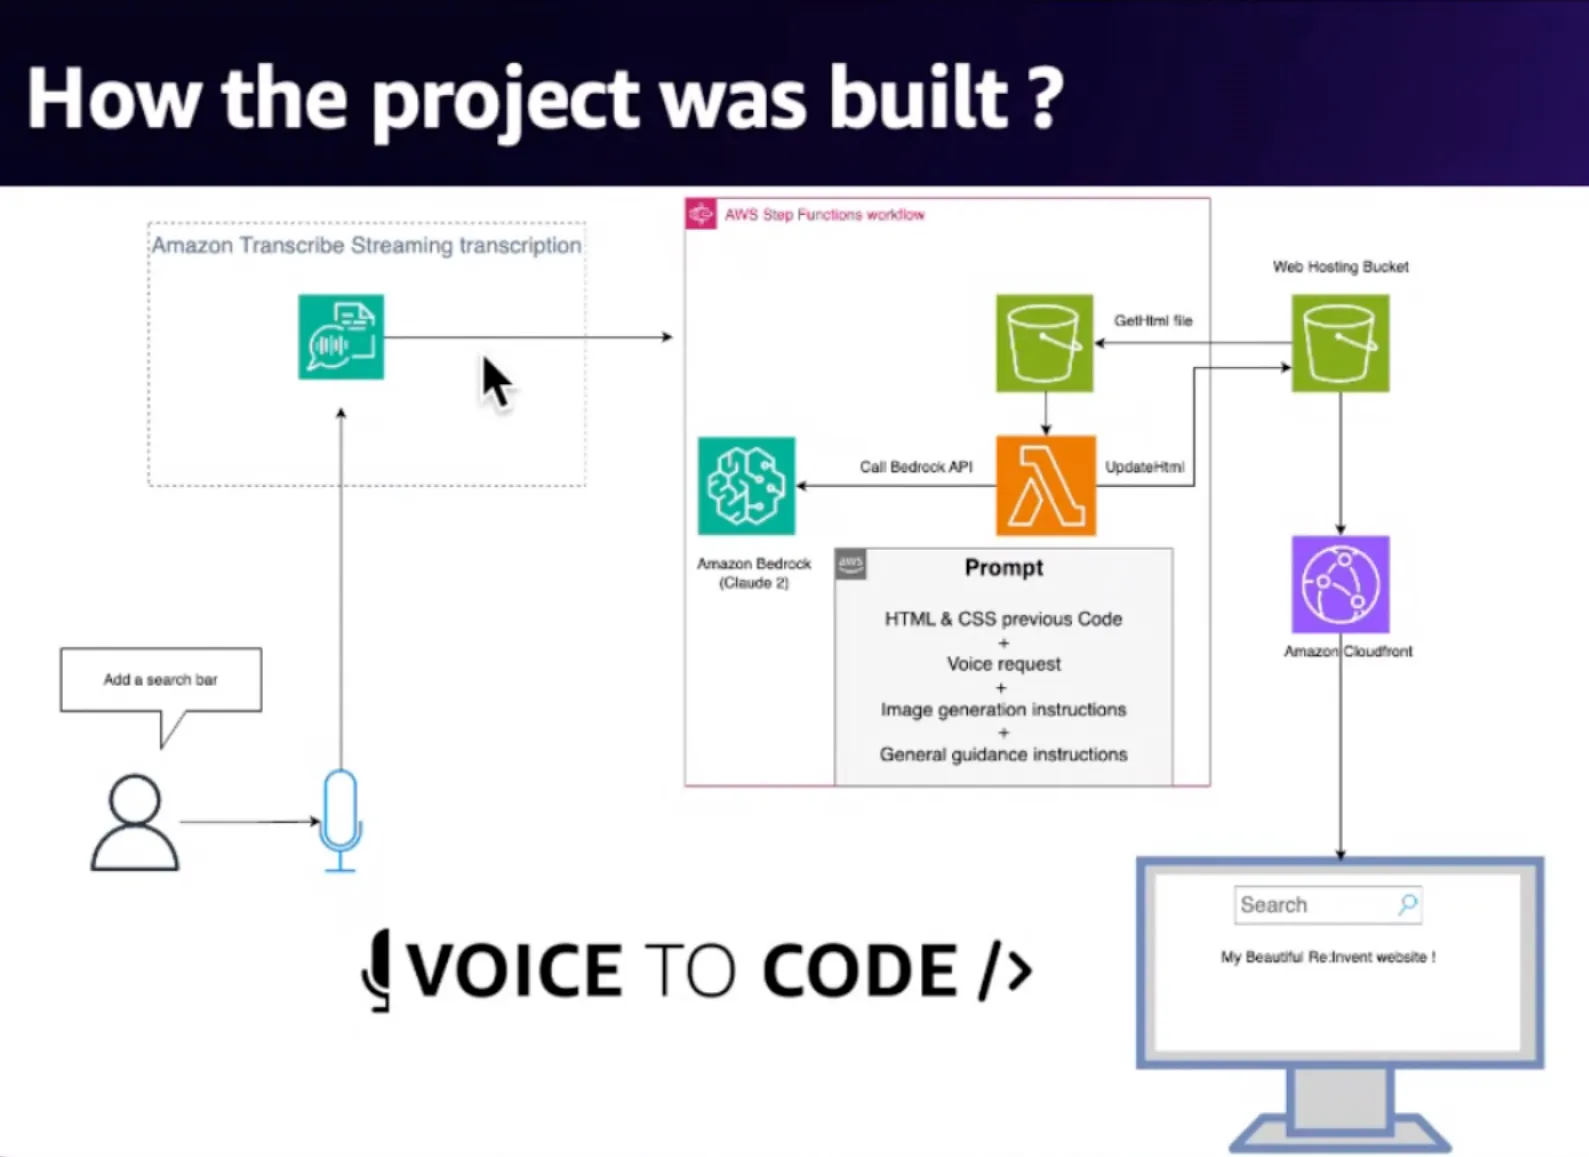 Architecture of Voice to Code